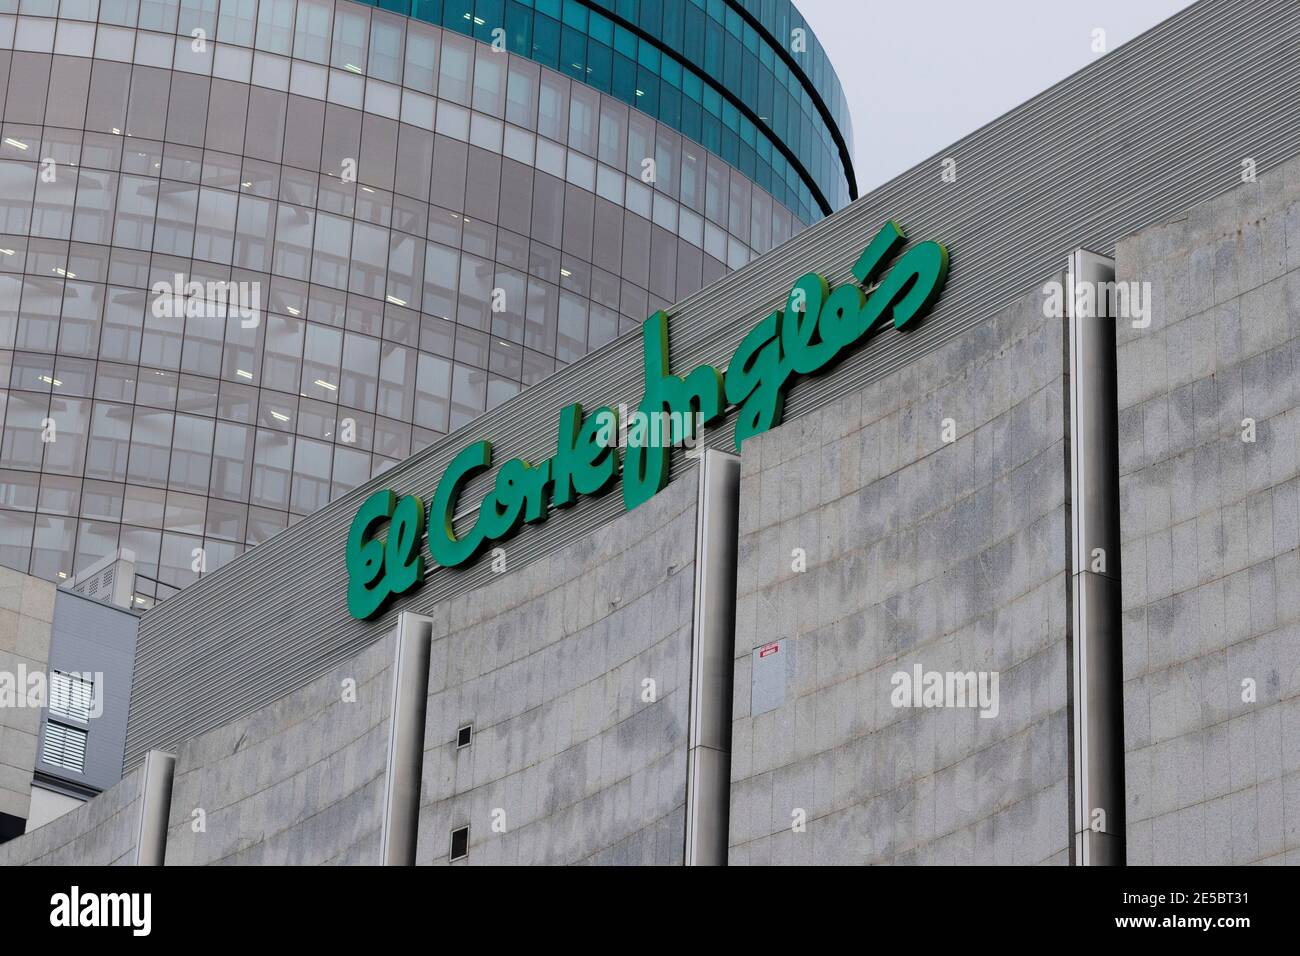 El Corte Ingles company logo at the top of a building in Madrid (Spain). Stock Photo